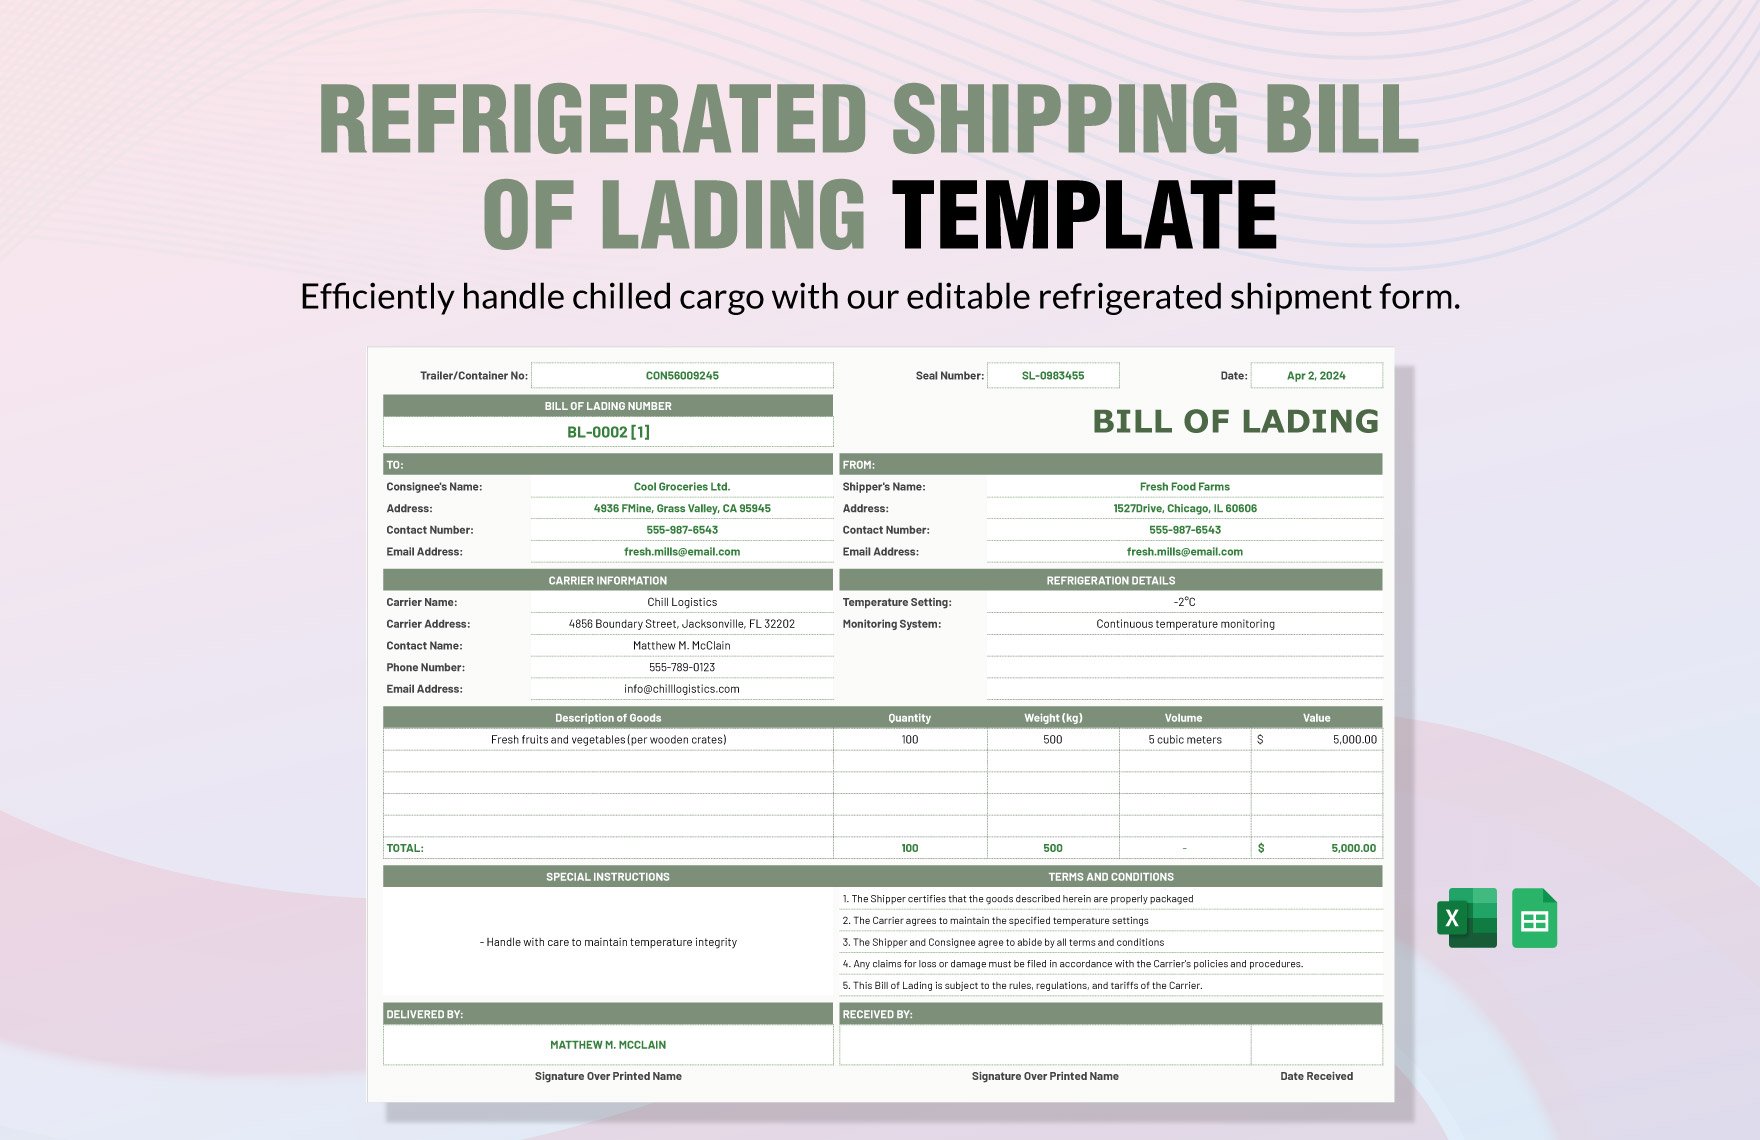 Refrigerated Shipping Bill of Lading Template